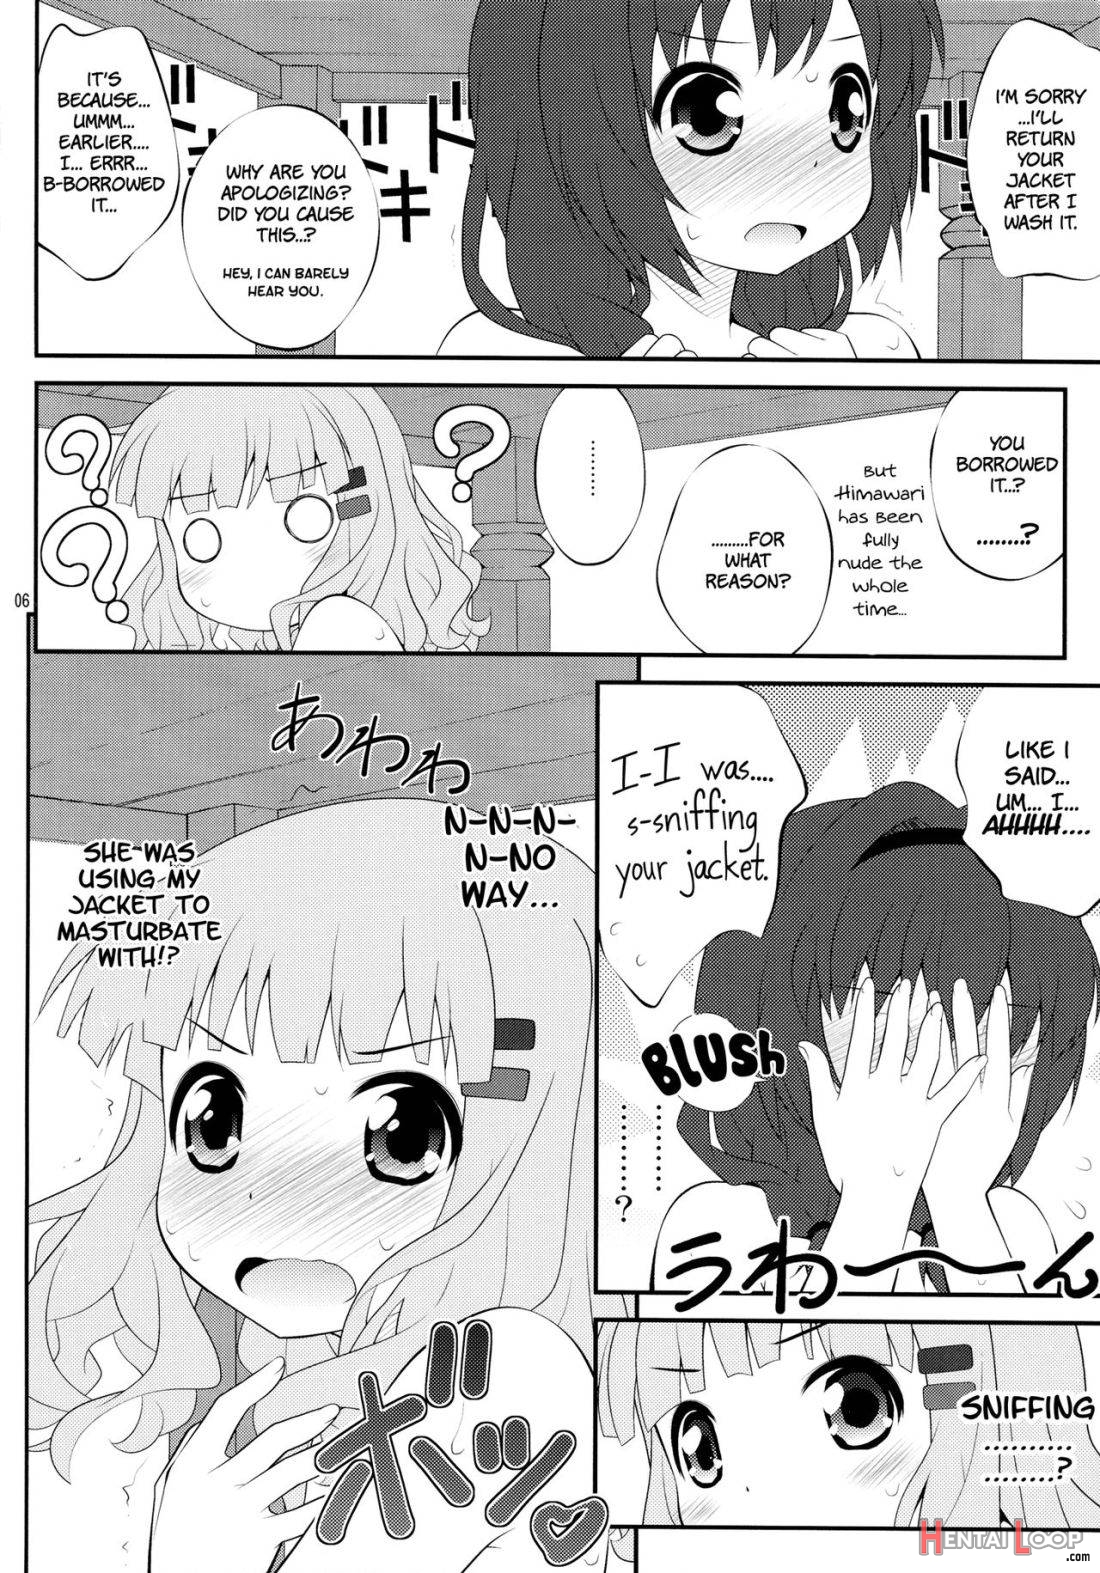 Himegoto Flowers 3 page 5